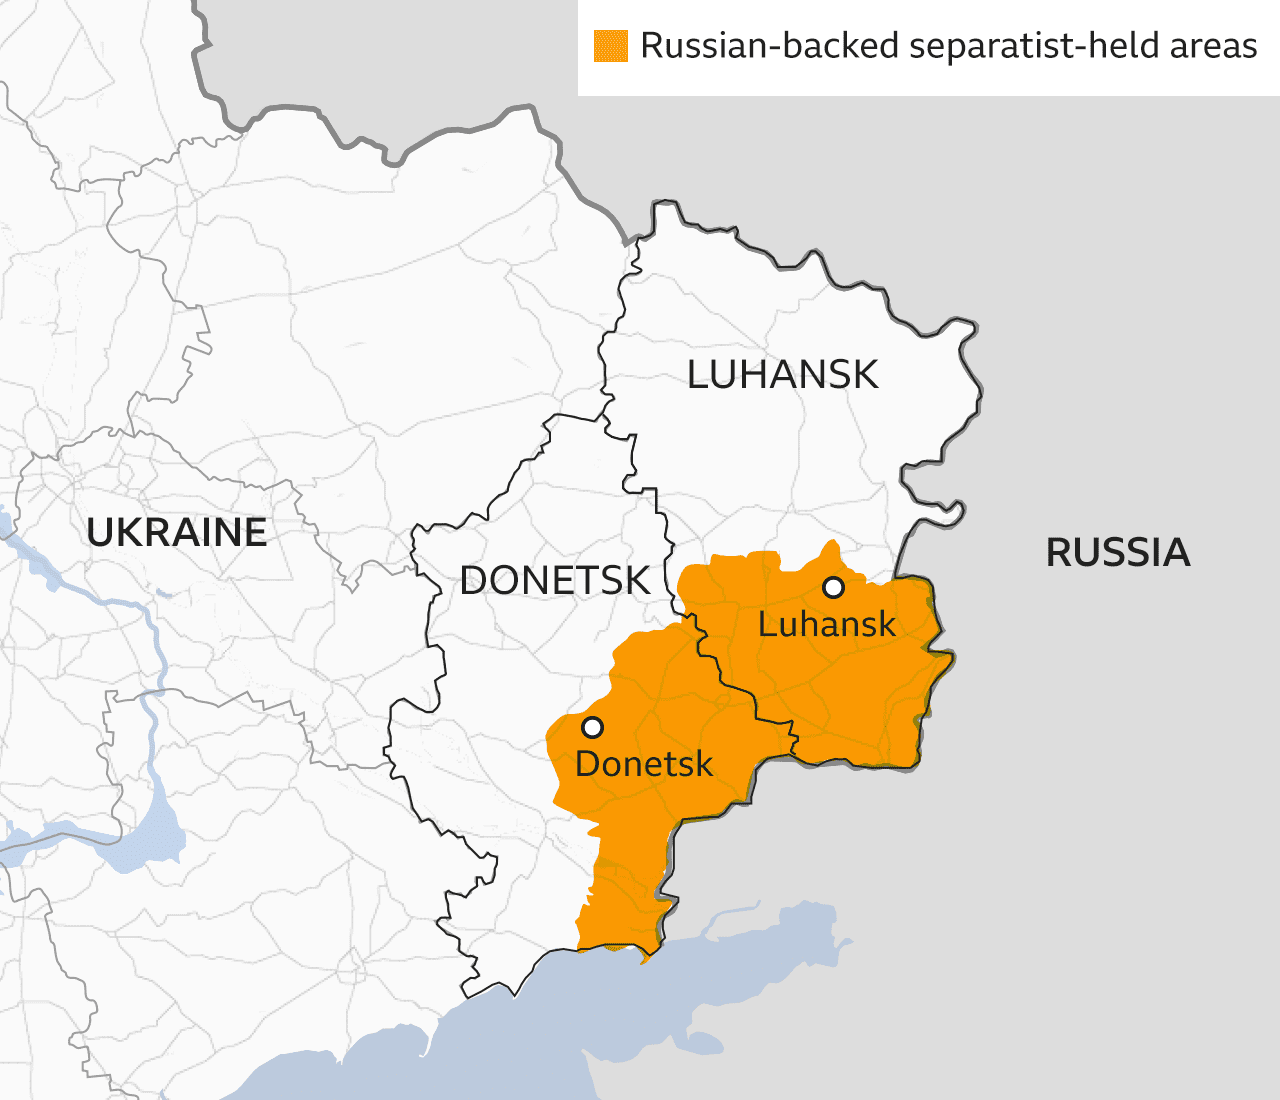 Map showing the separatist regions in Luhansk and Donetsk in eastern Ukraine